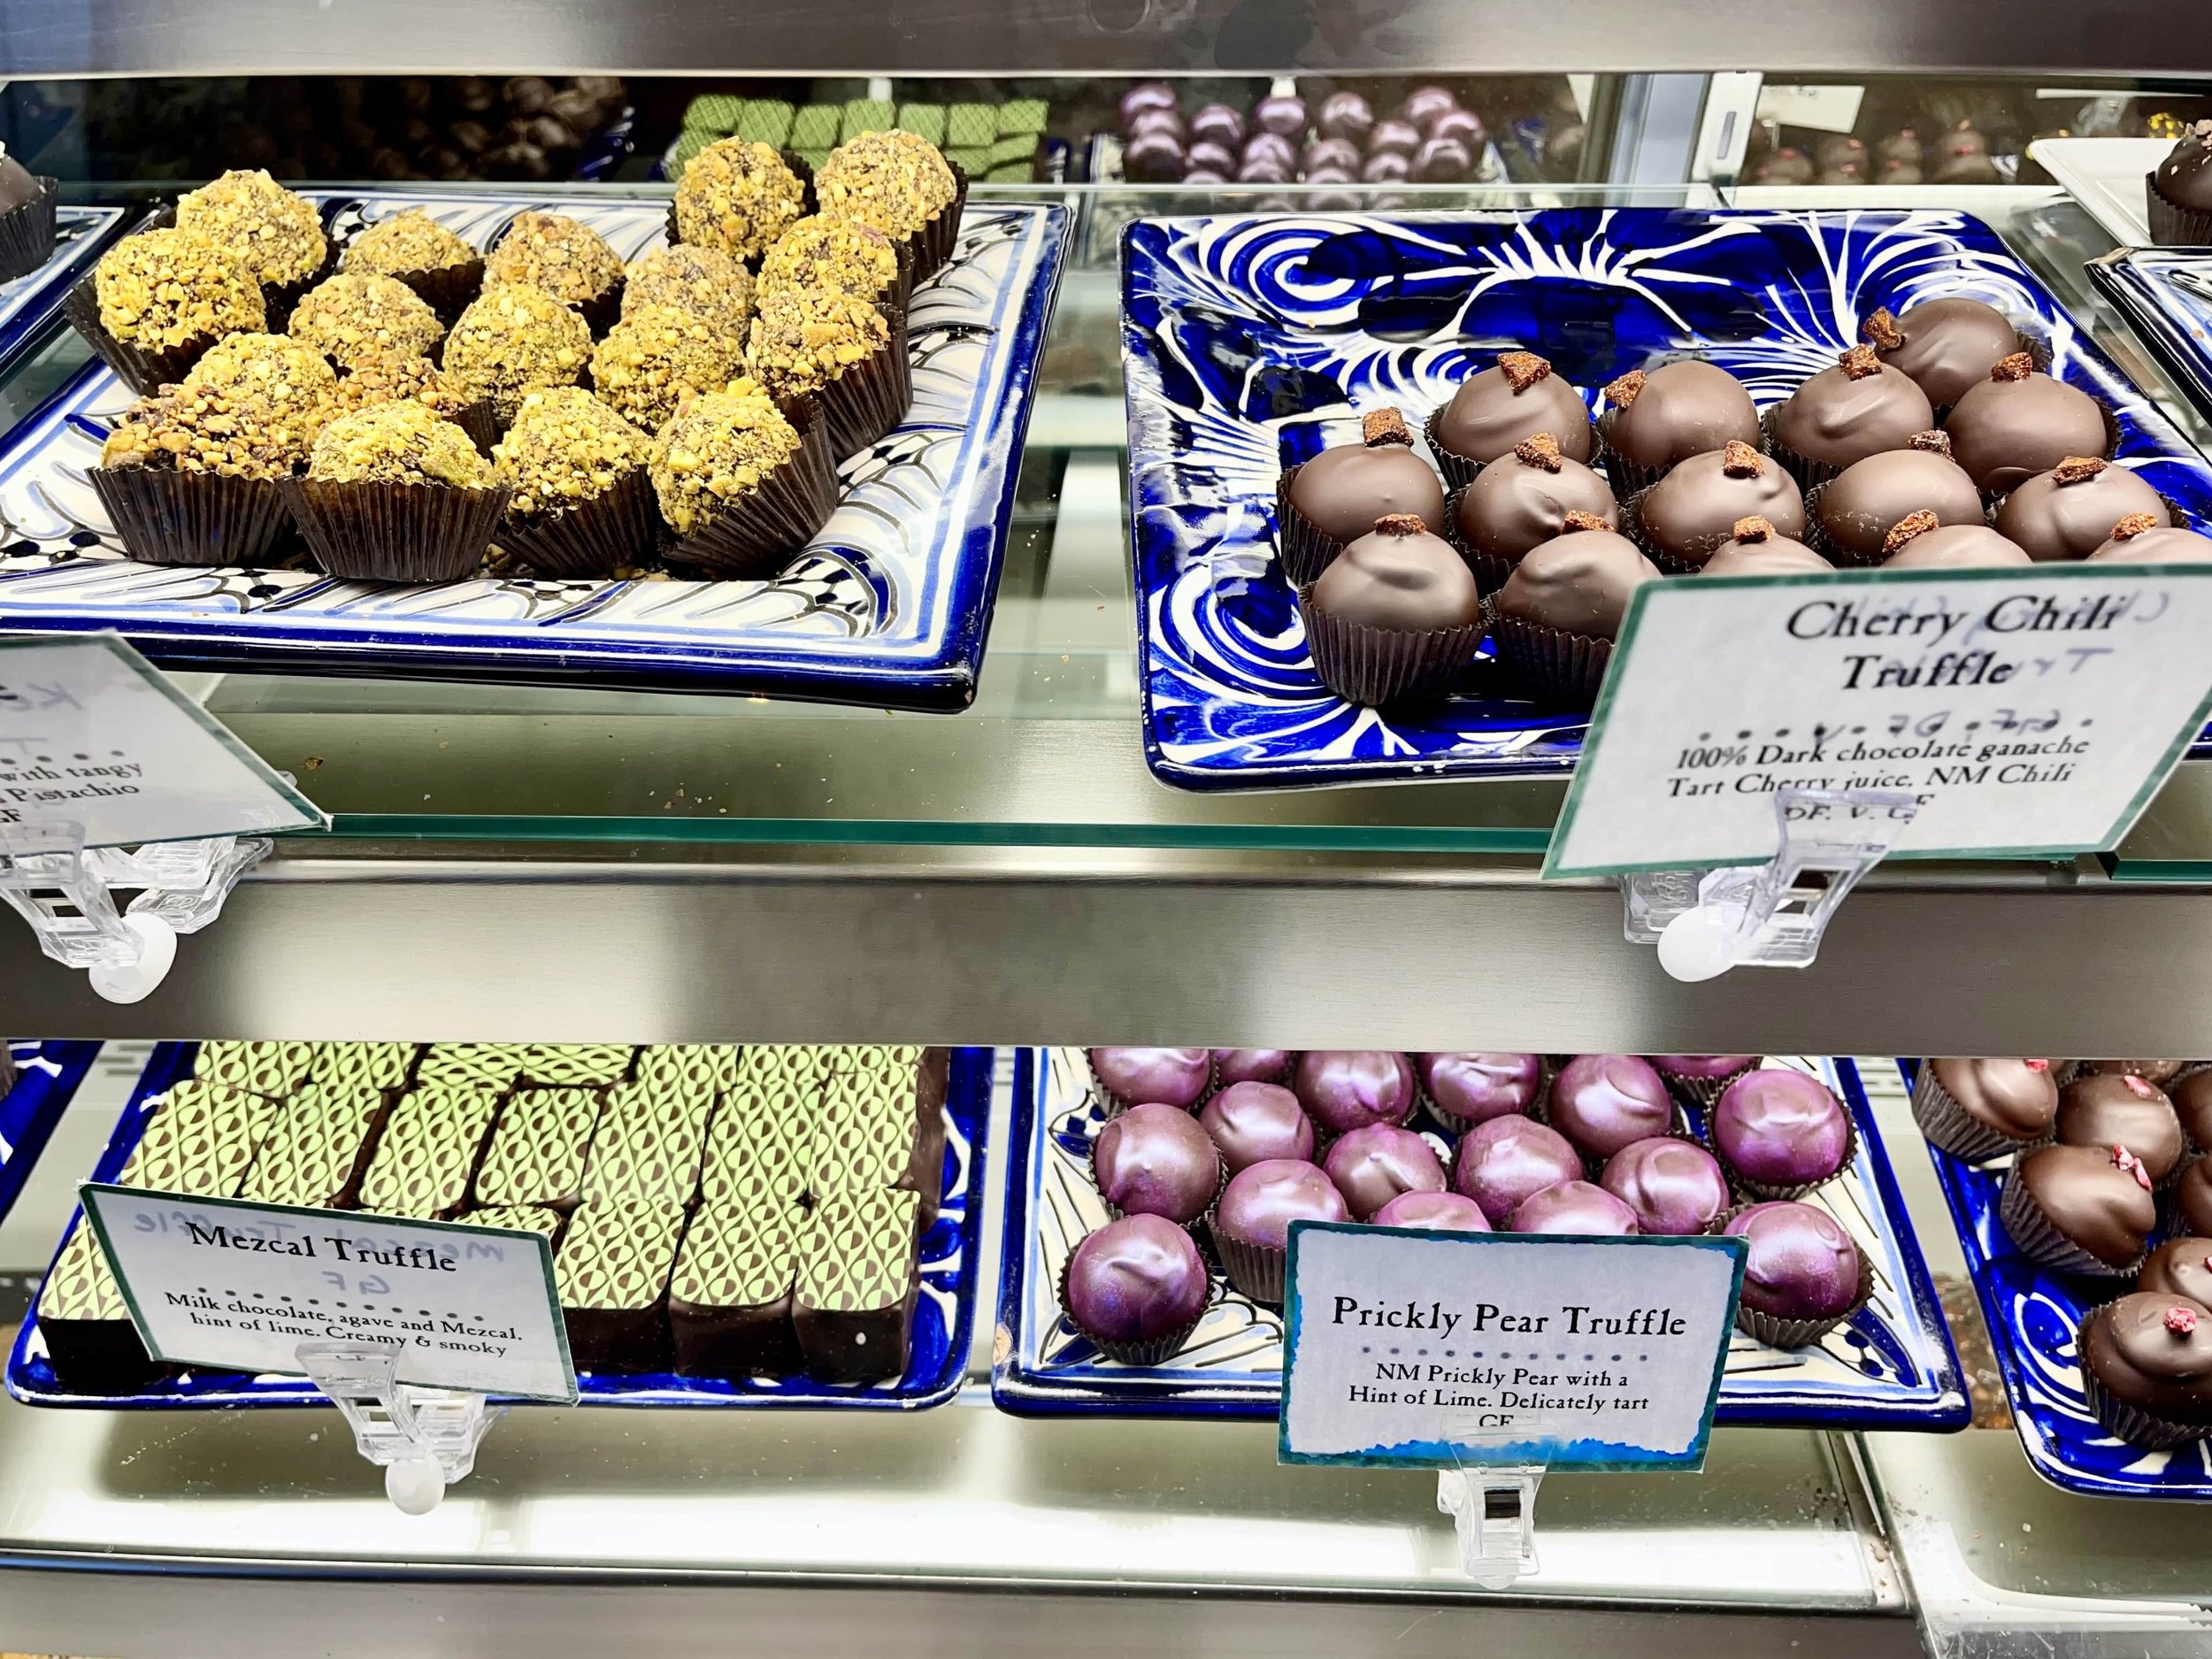 Image of a stop on the Chocolate Trail